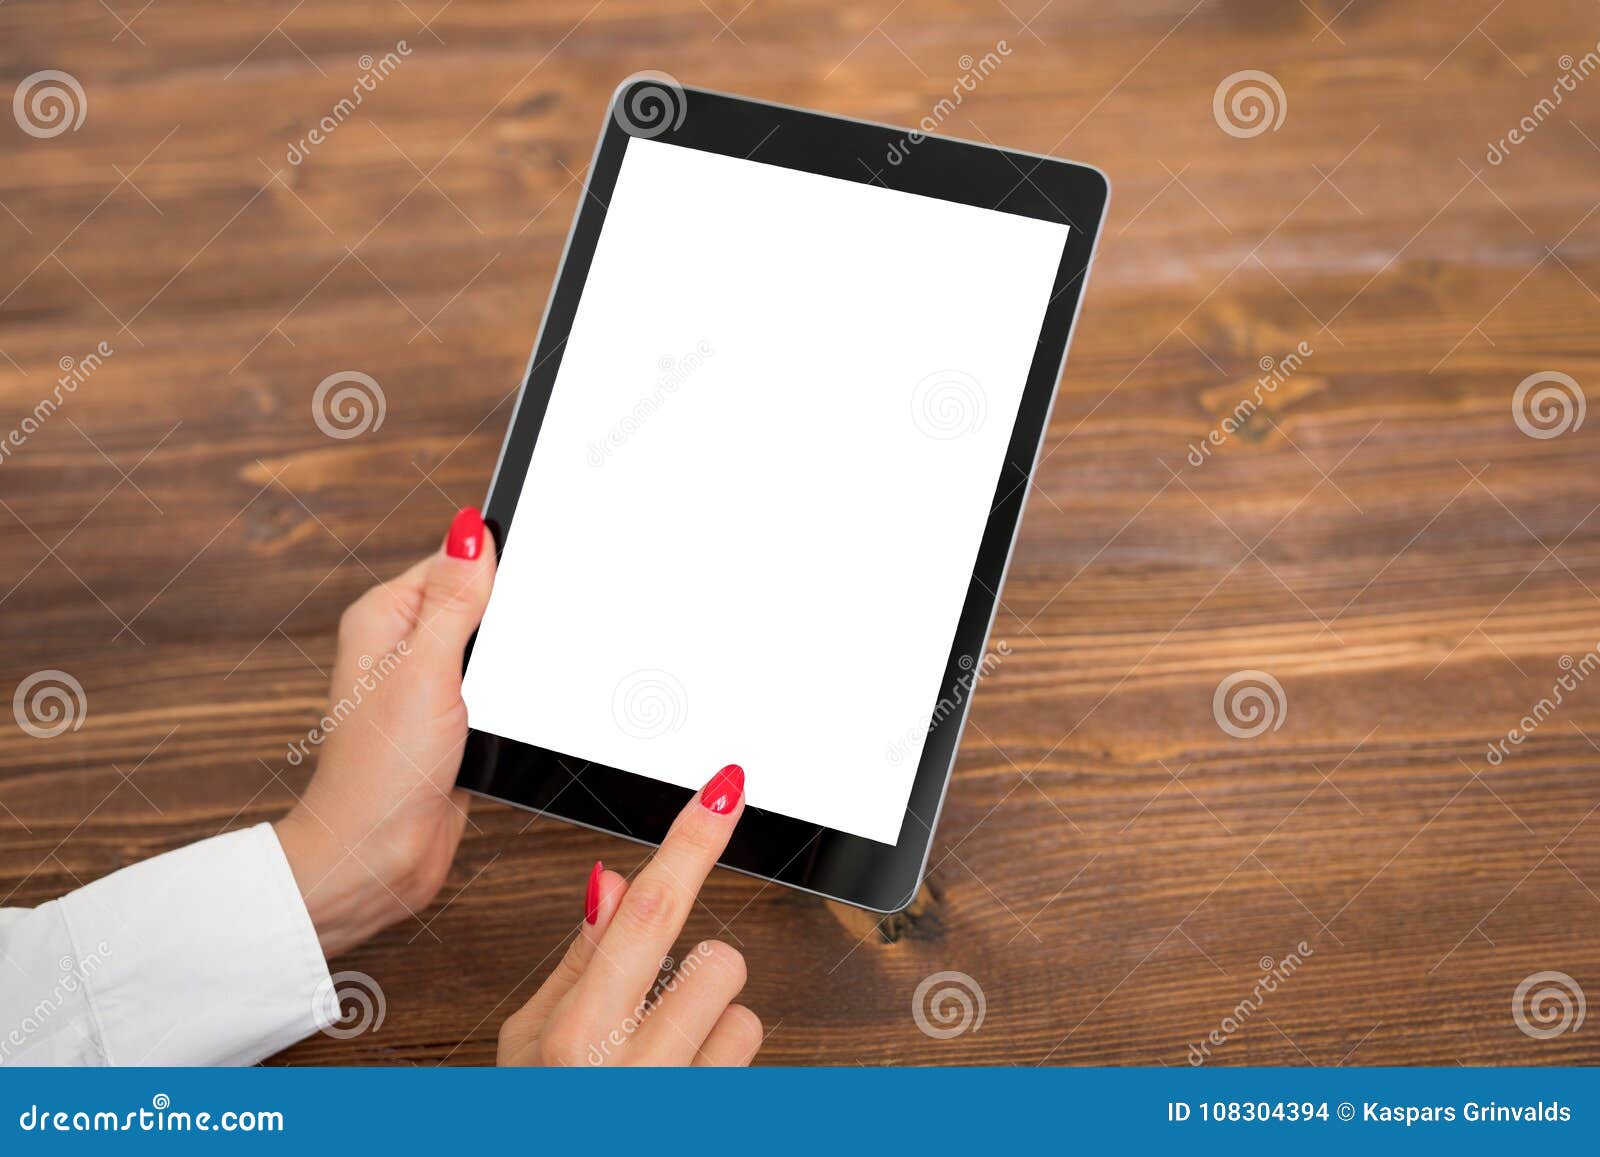 person using tablet with empty blank screen, vertical orientation